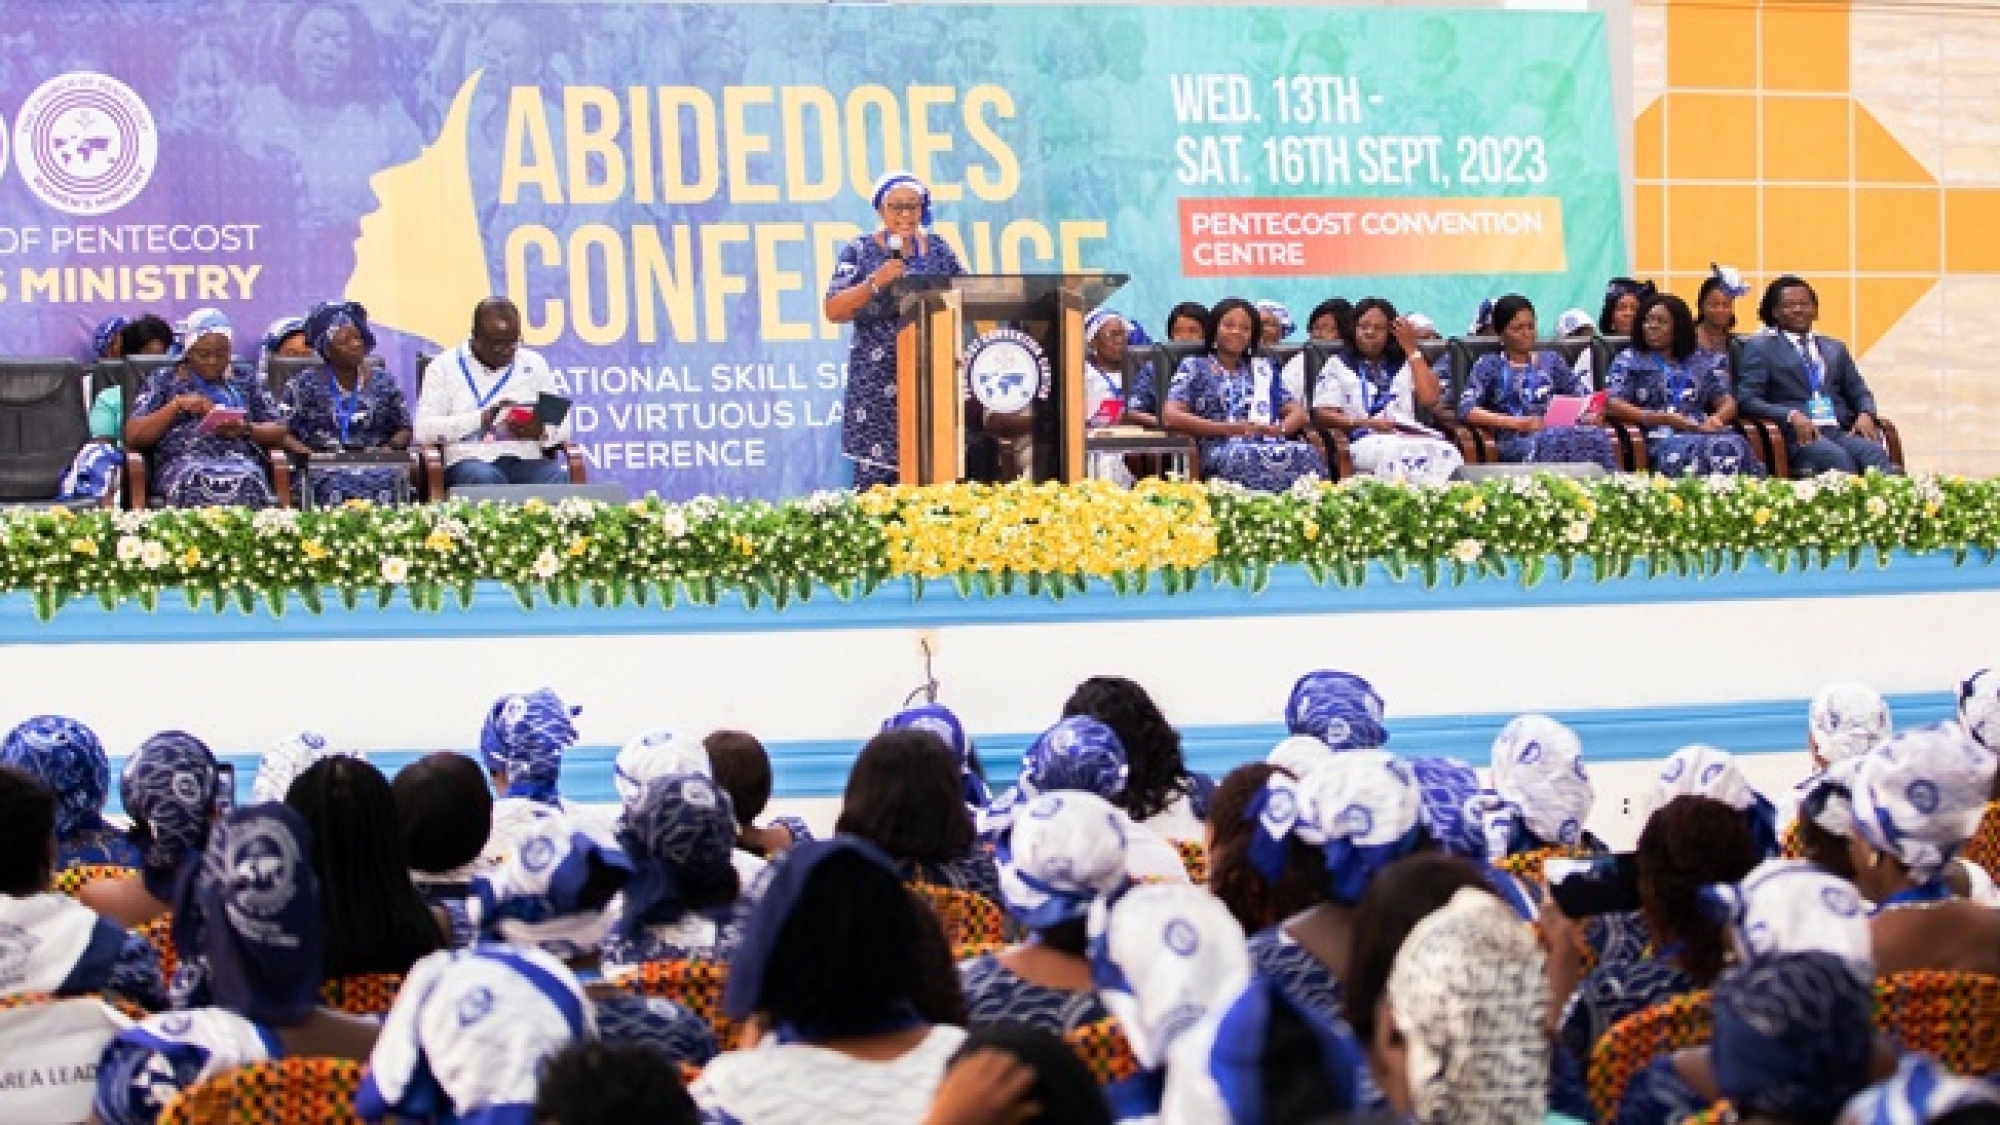 ABIDEDOES Conference Commences In Spectacular Fashion web